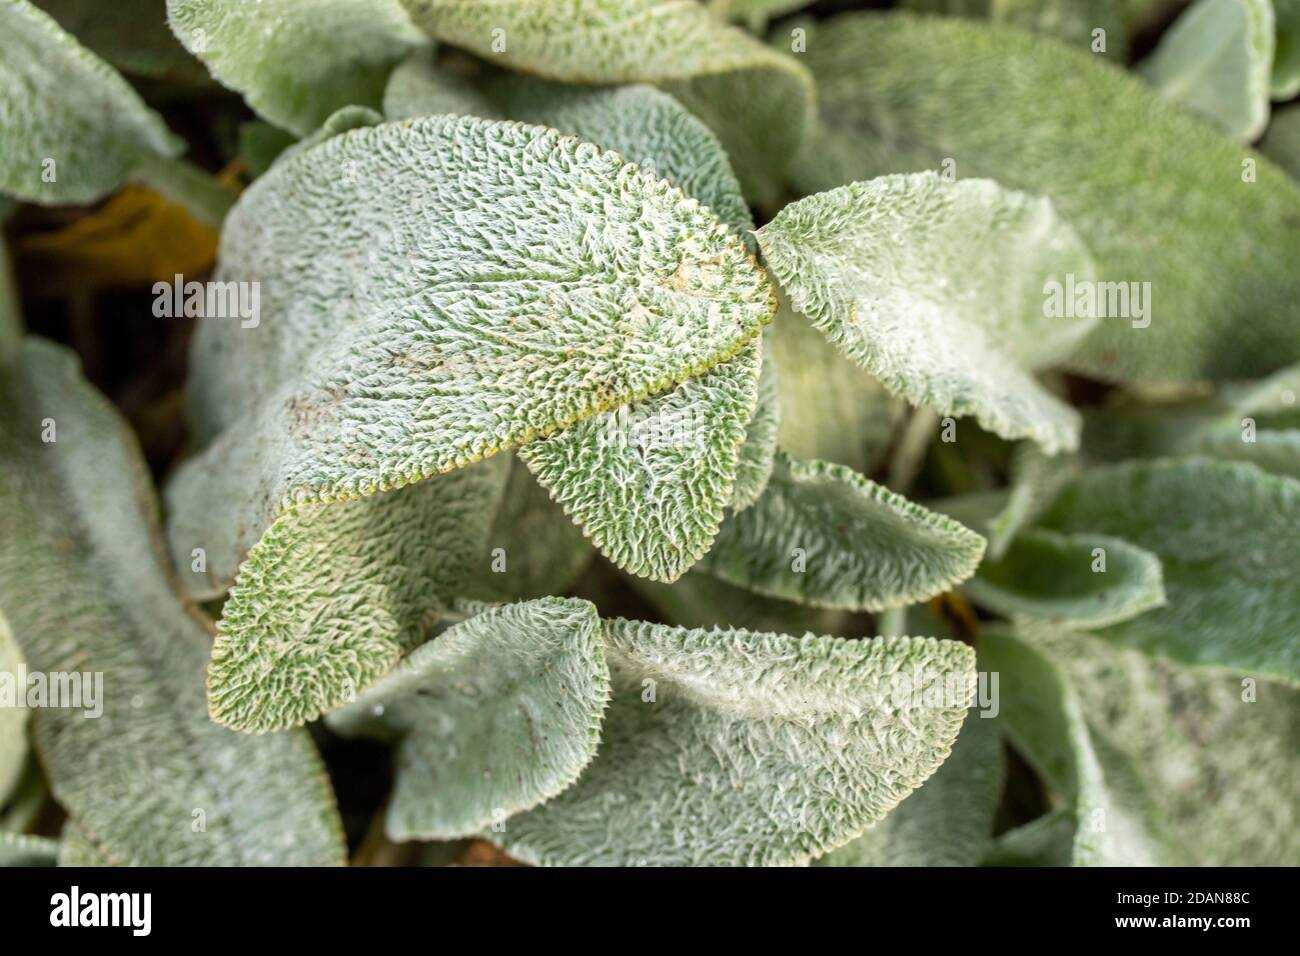 Stachys byzantine, lamb's-ear, close-up abstract of ground cover plants as natural patterns and texture Stock Photo